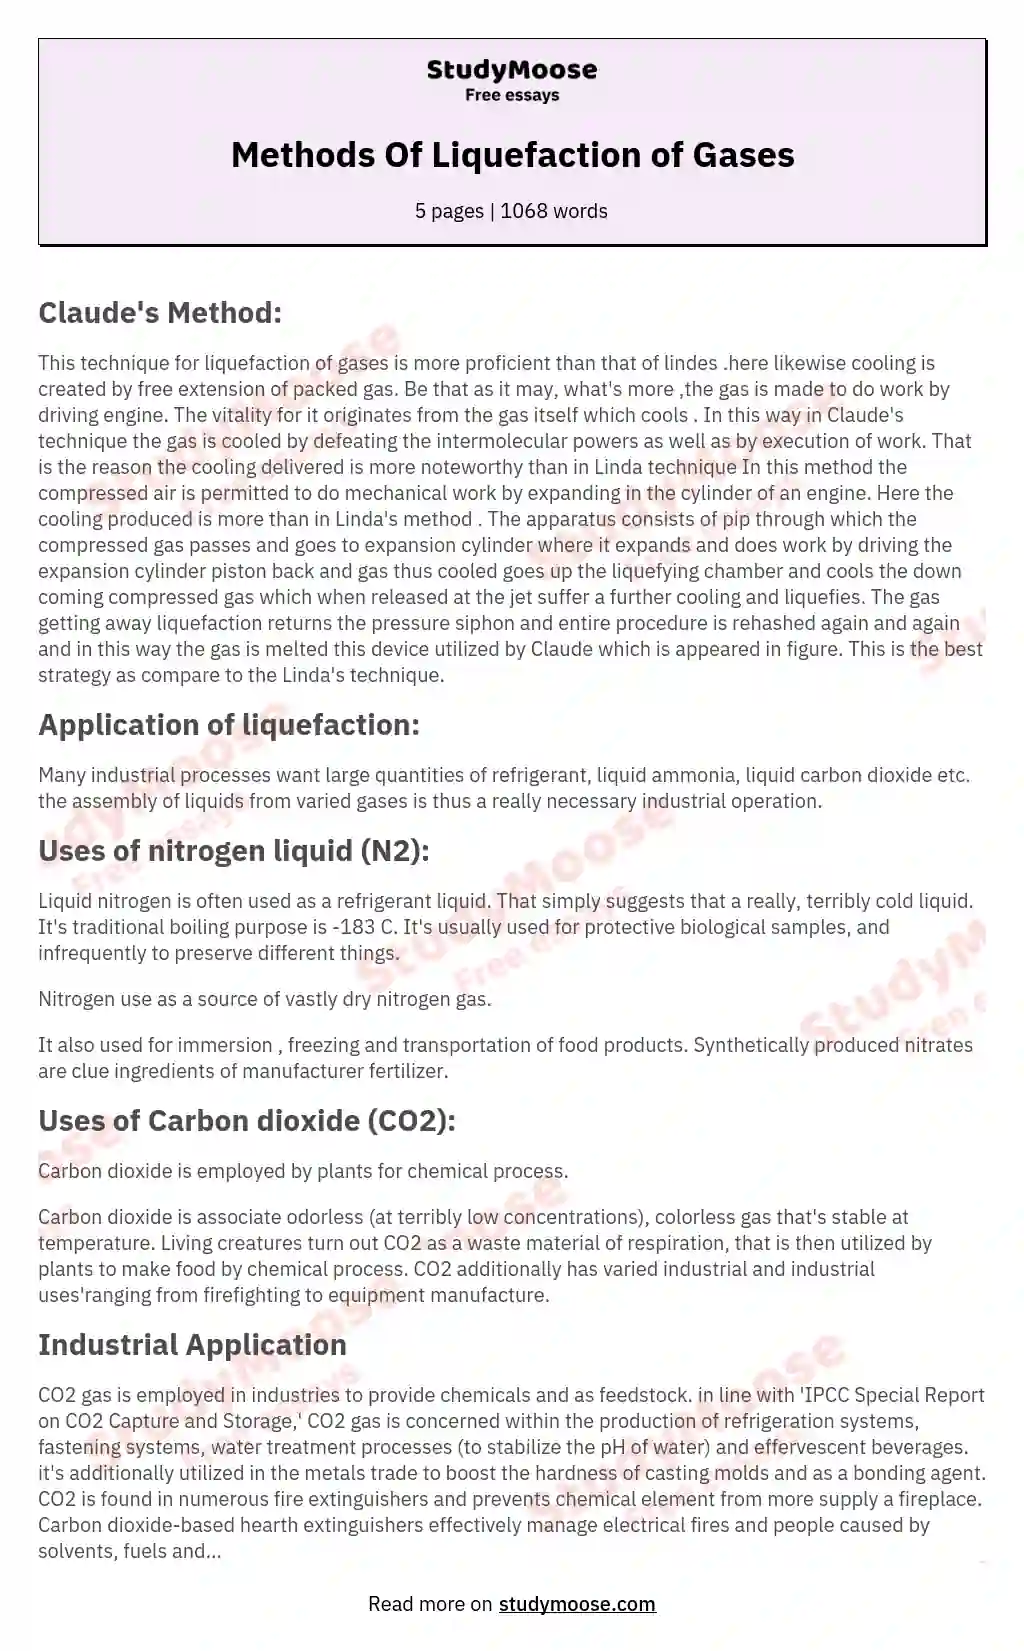 Methods Of Liquefaction of Gases